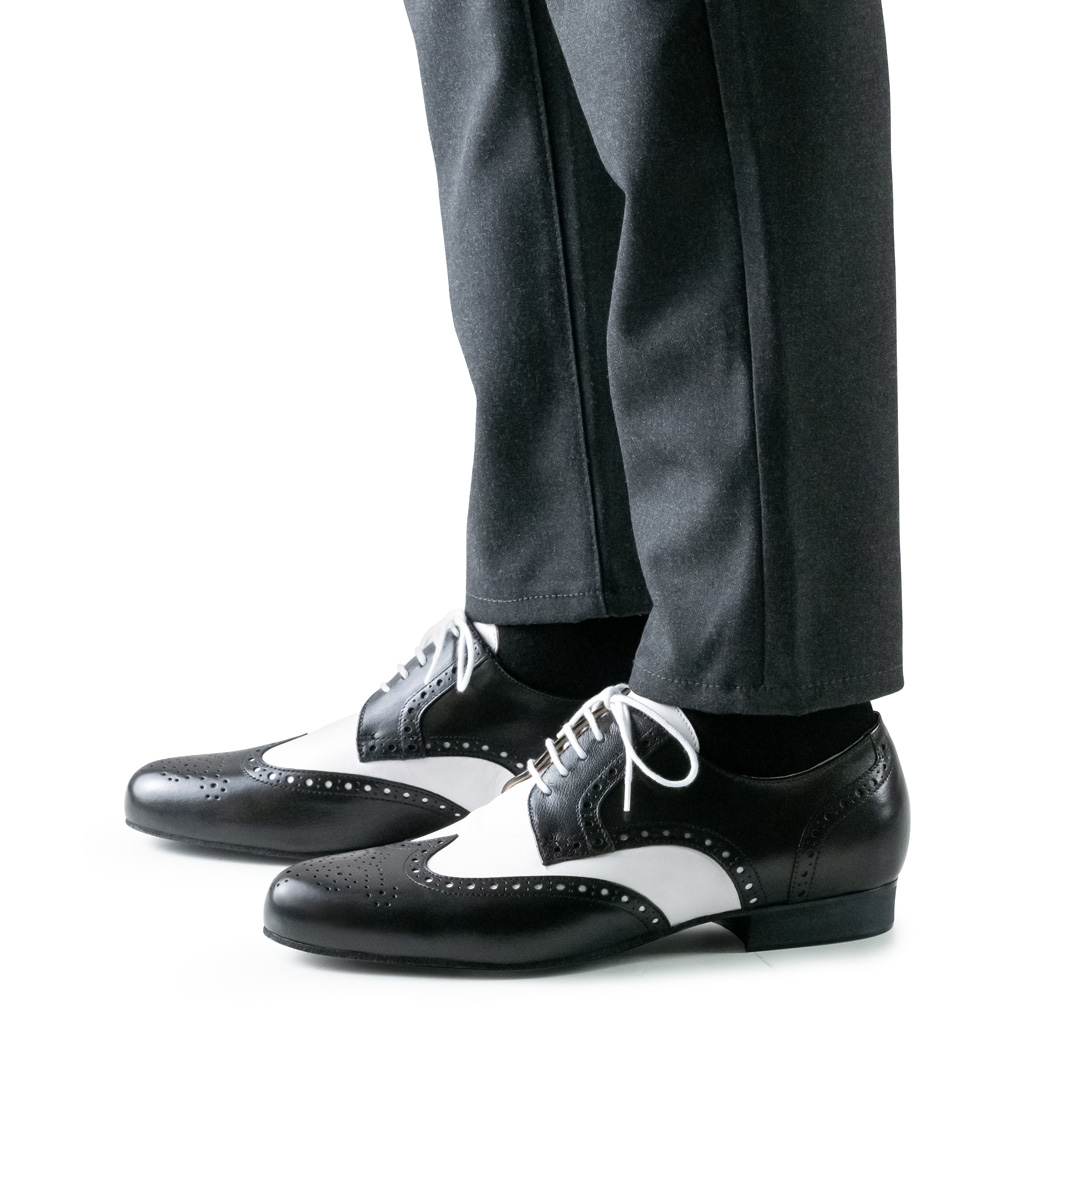 Grey trousers in combination with 2 cm high Werner Kern men's dance shoe for tango